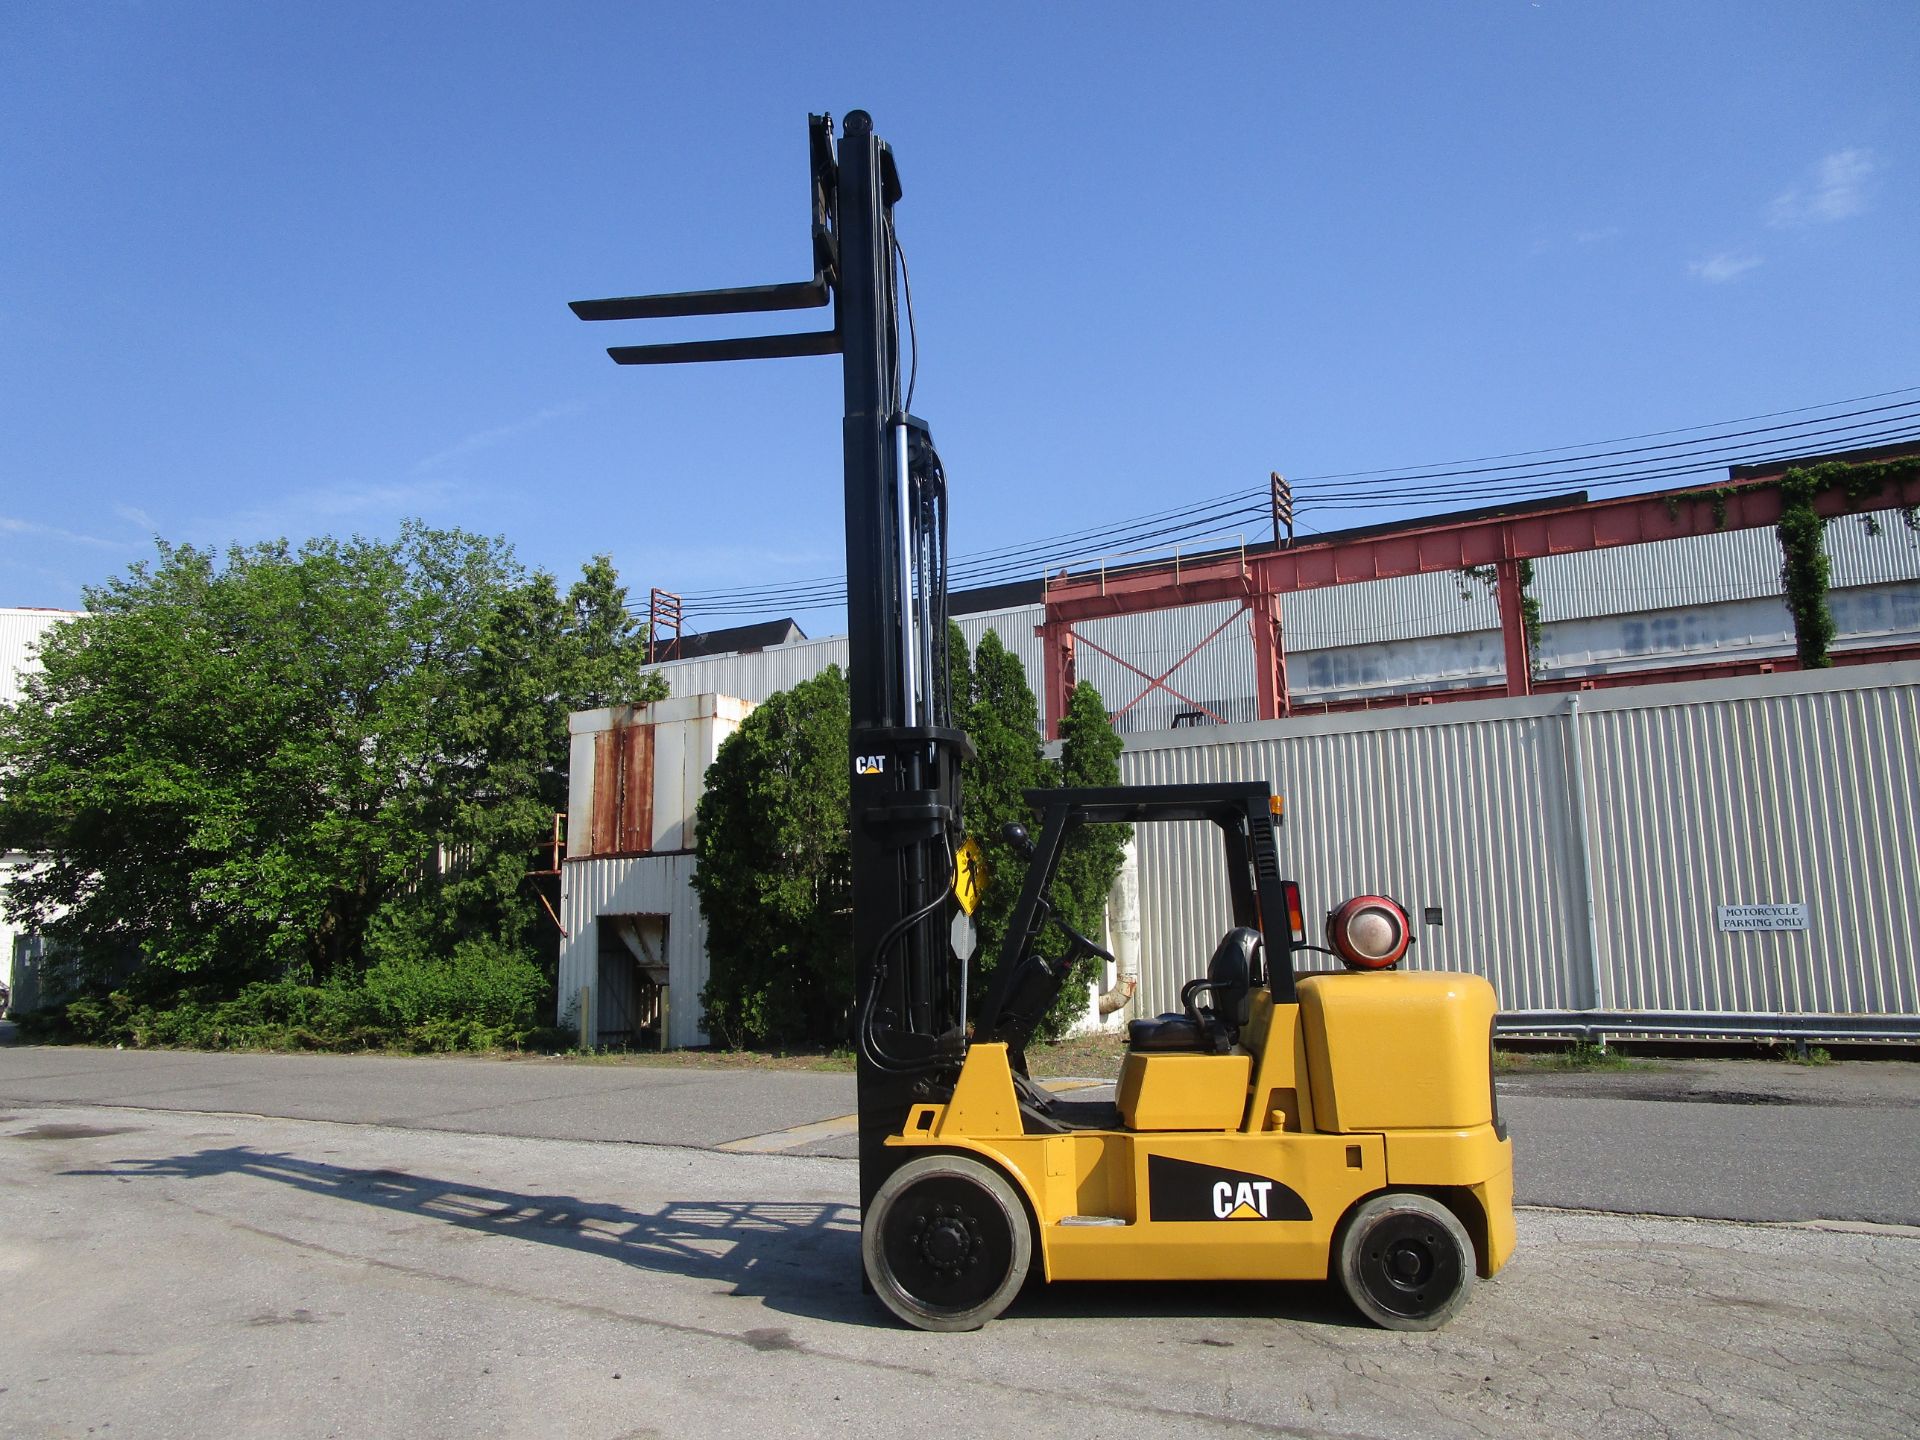 Caterpillar GC60K 13,000lb Forklift - Located in Lester, PA - Image 4 of 10